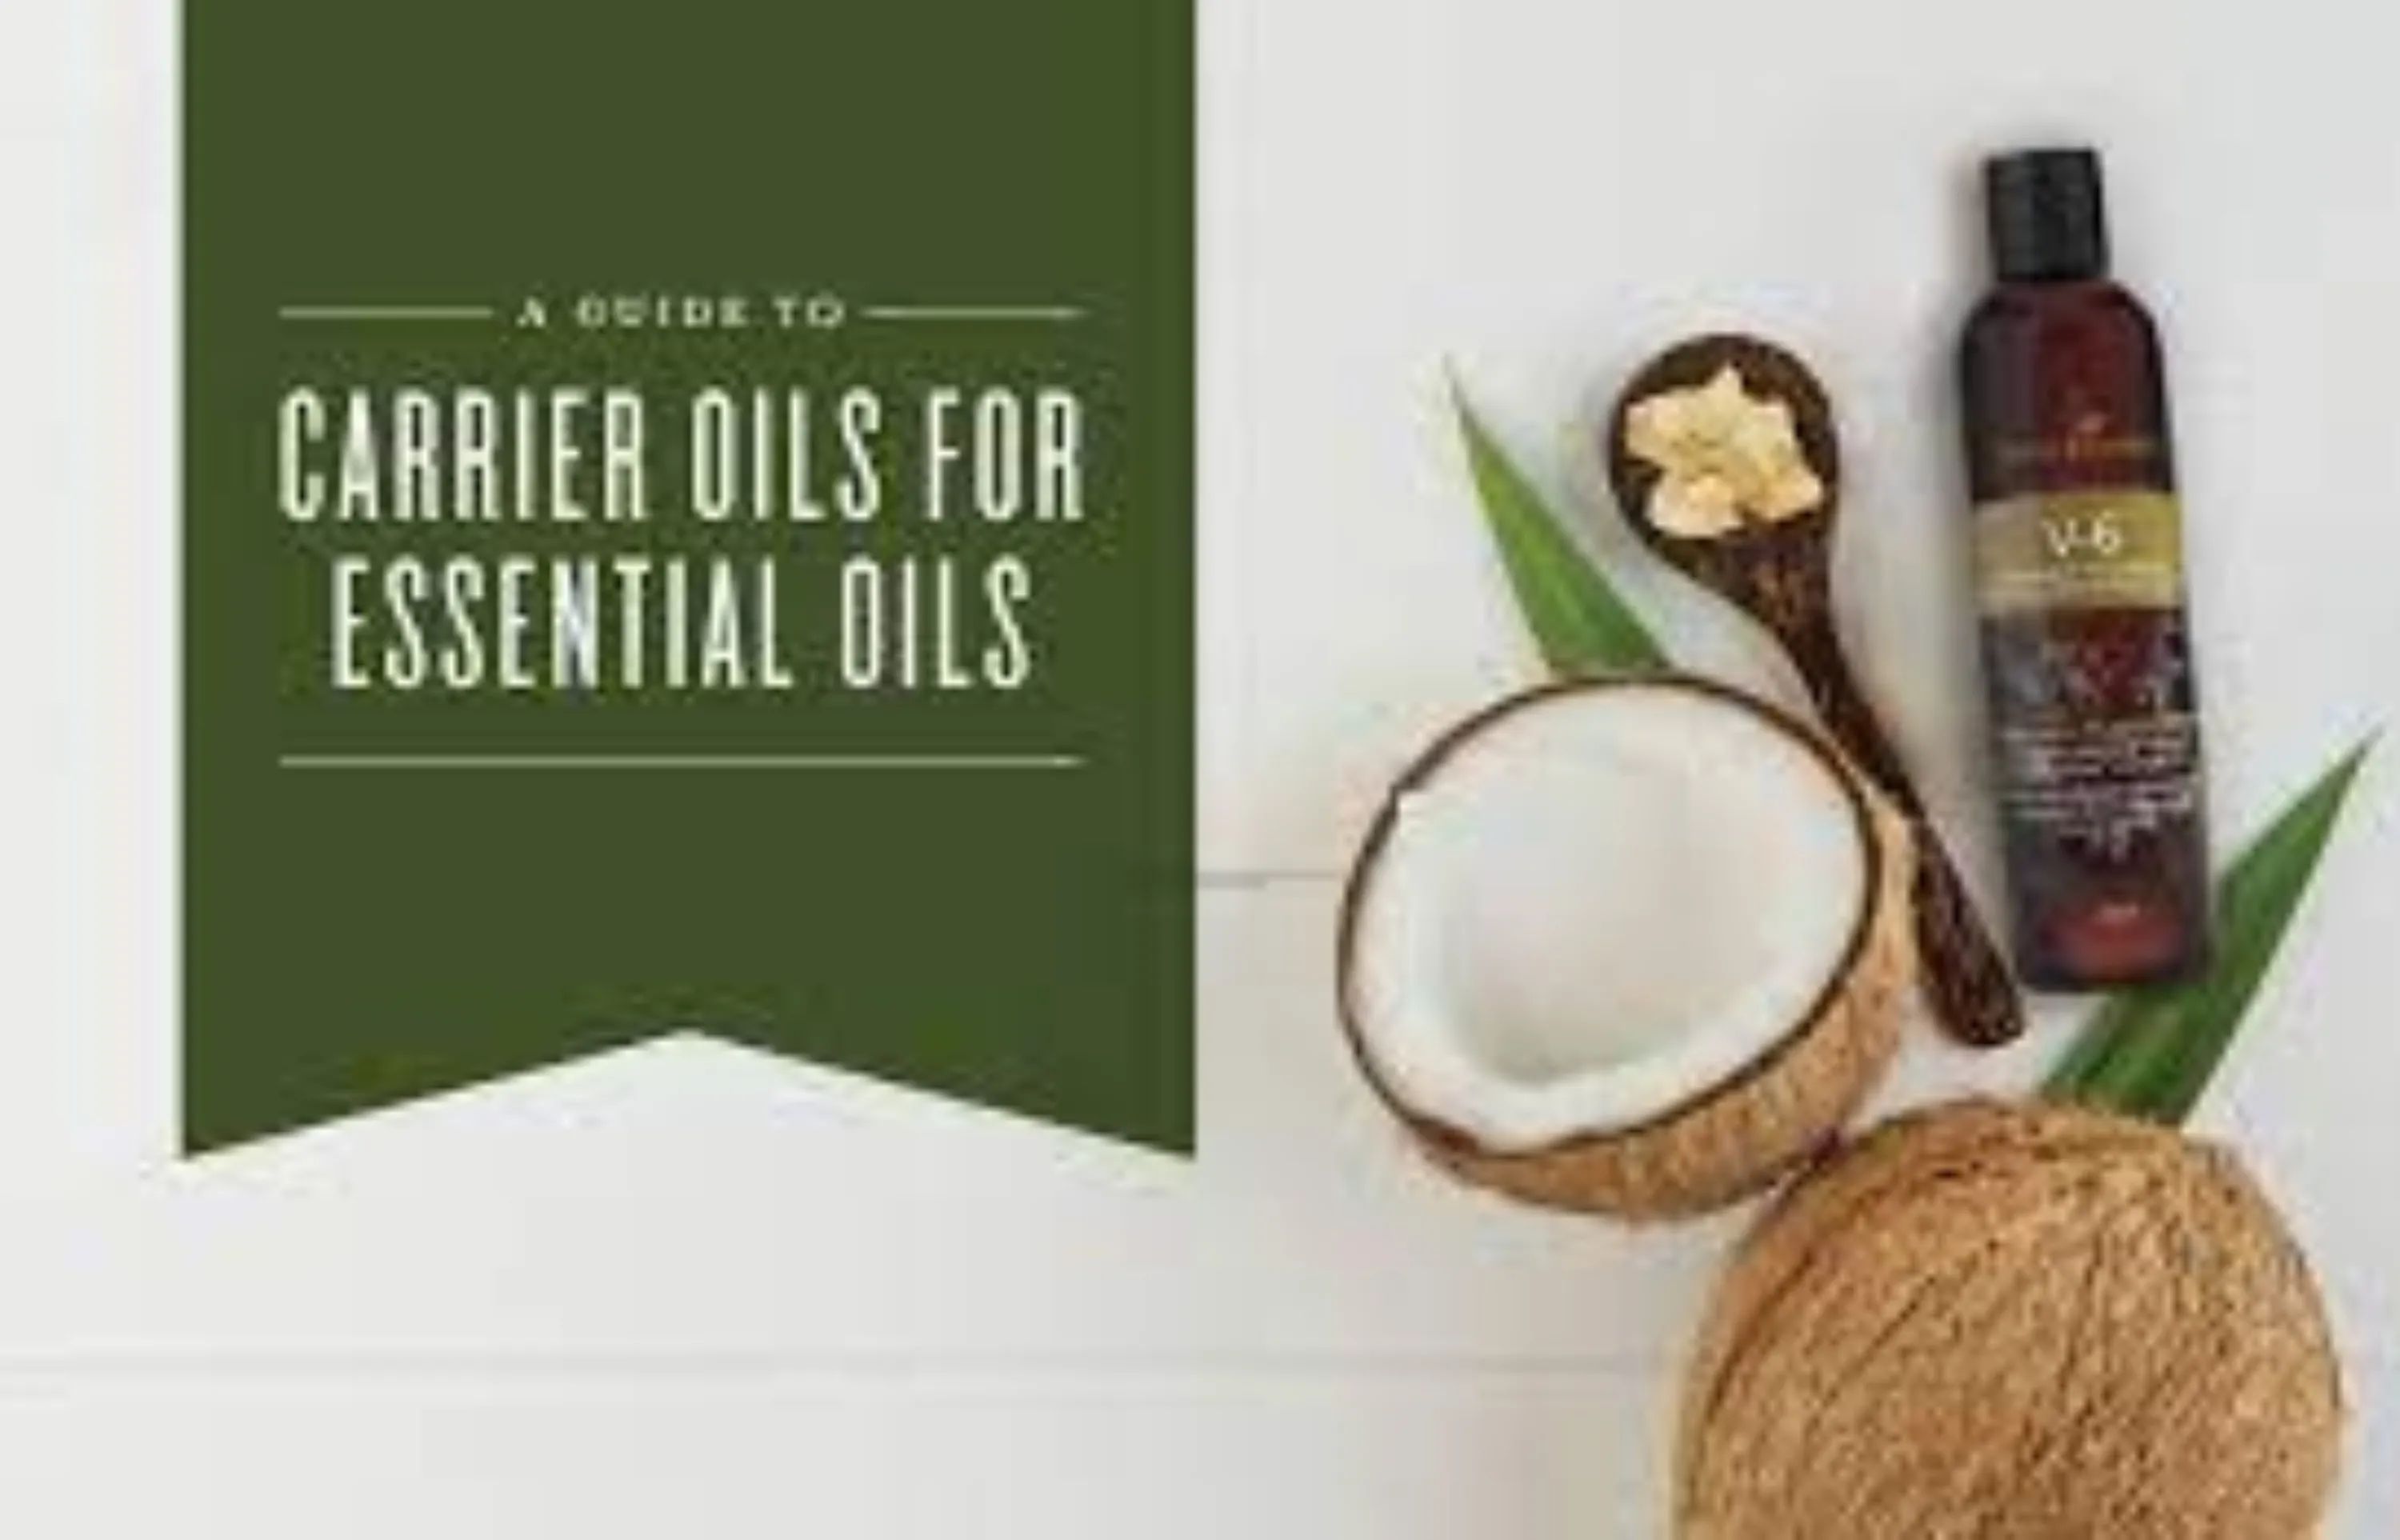 What is a Carrier Oil for Essential Oils